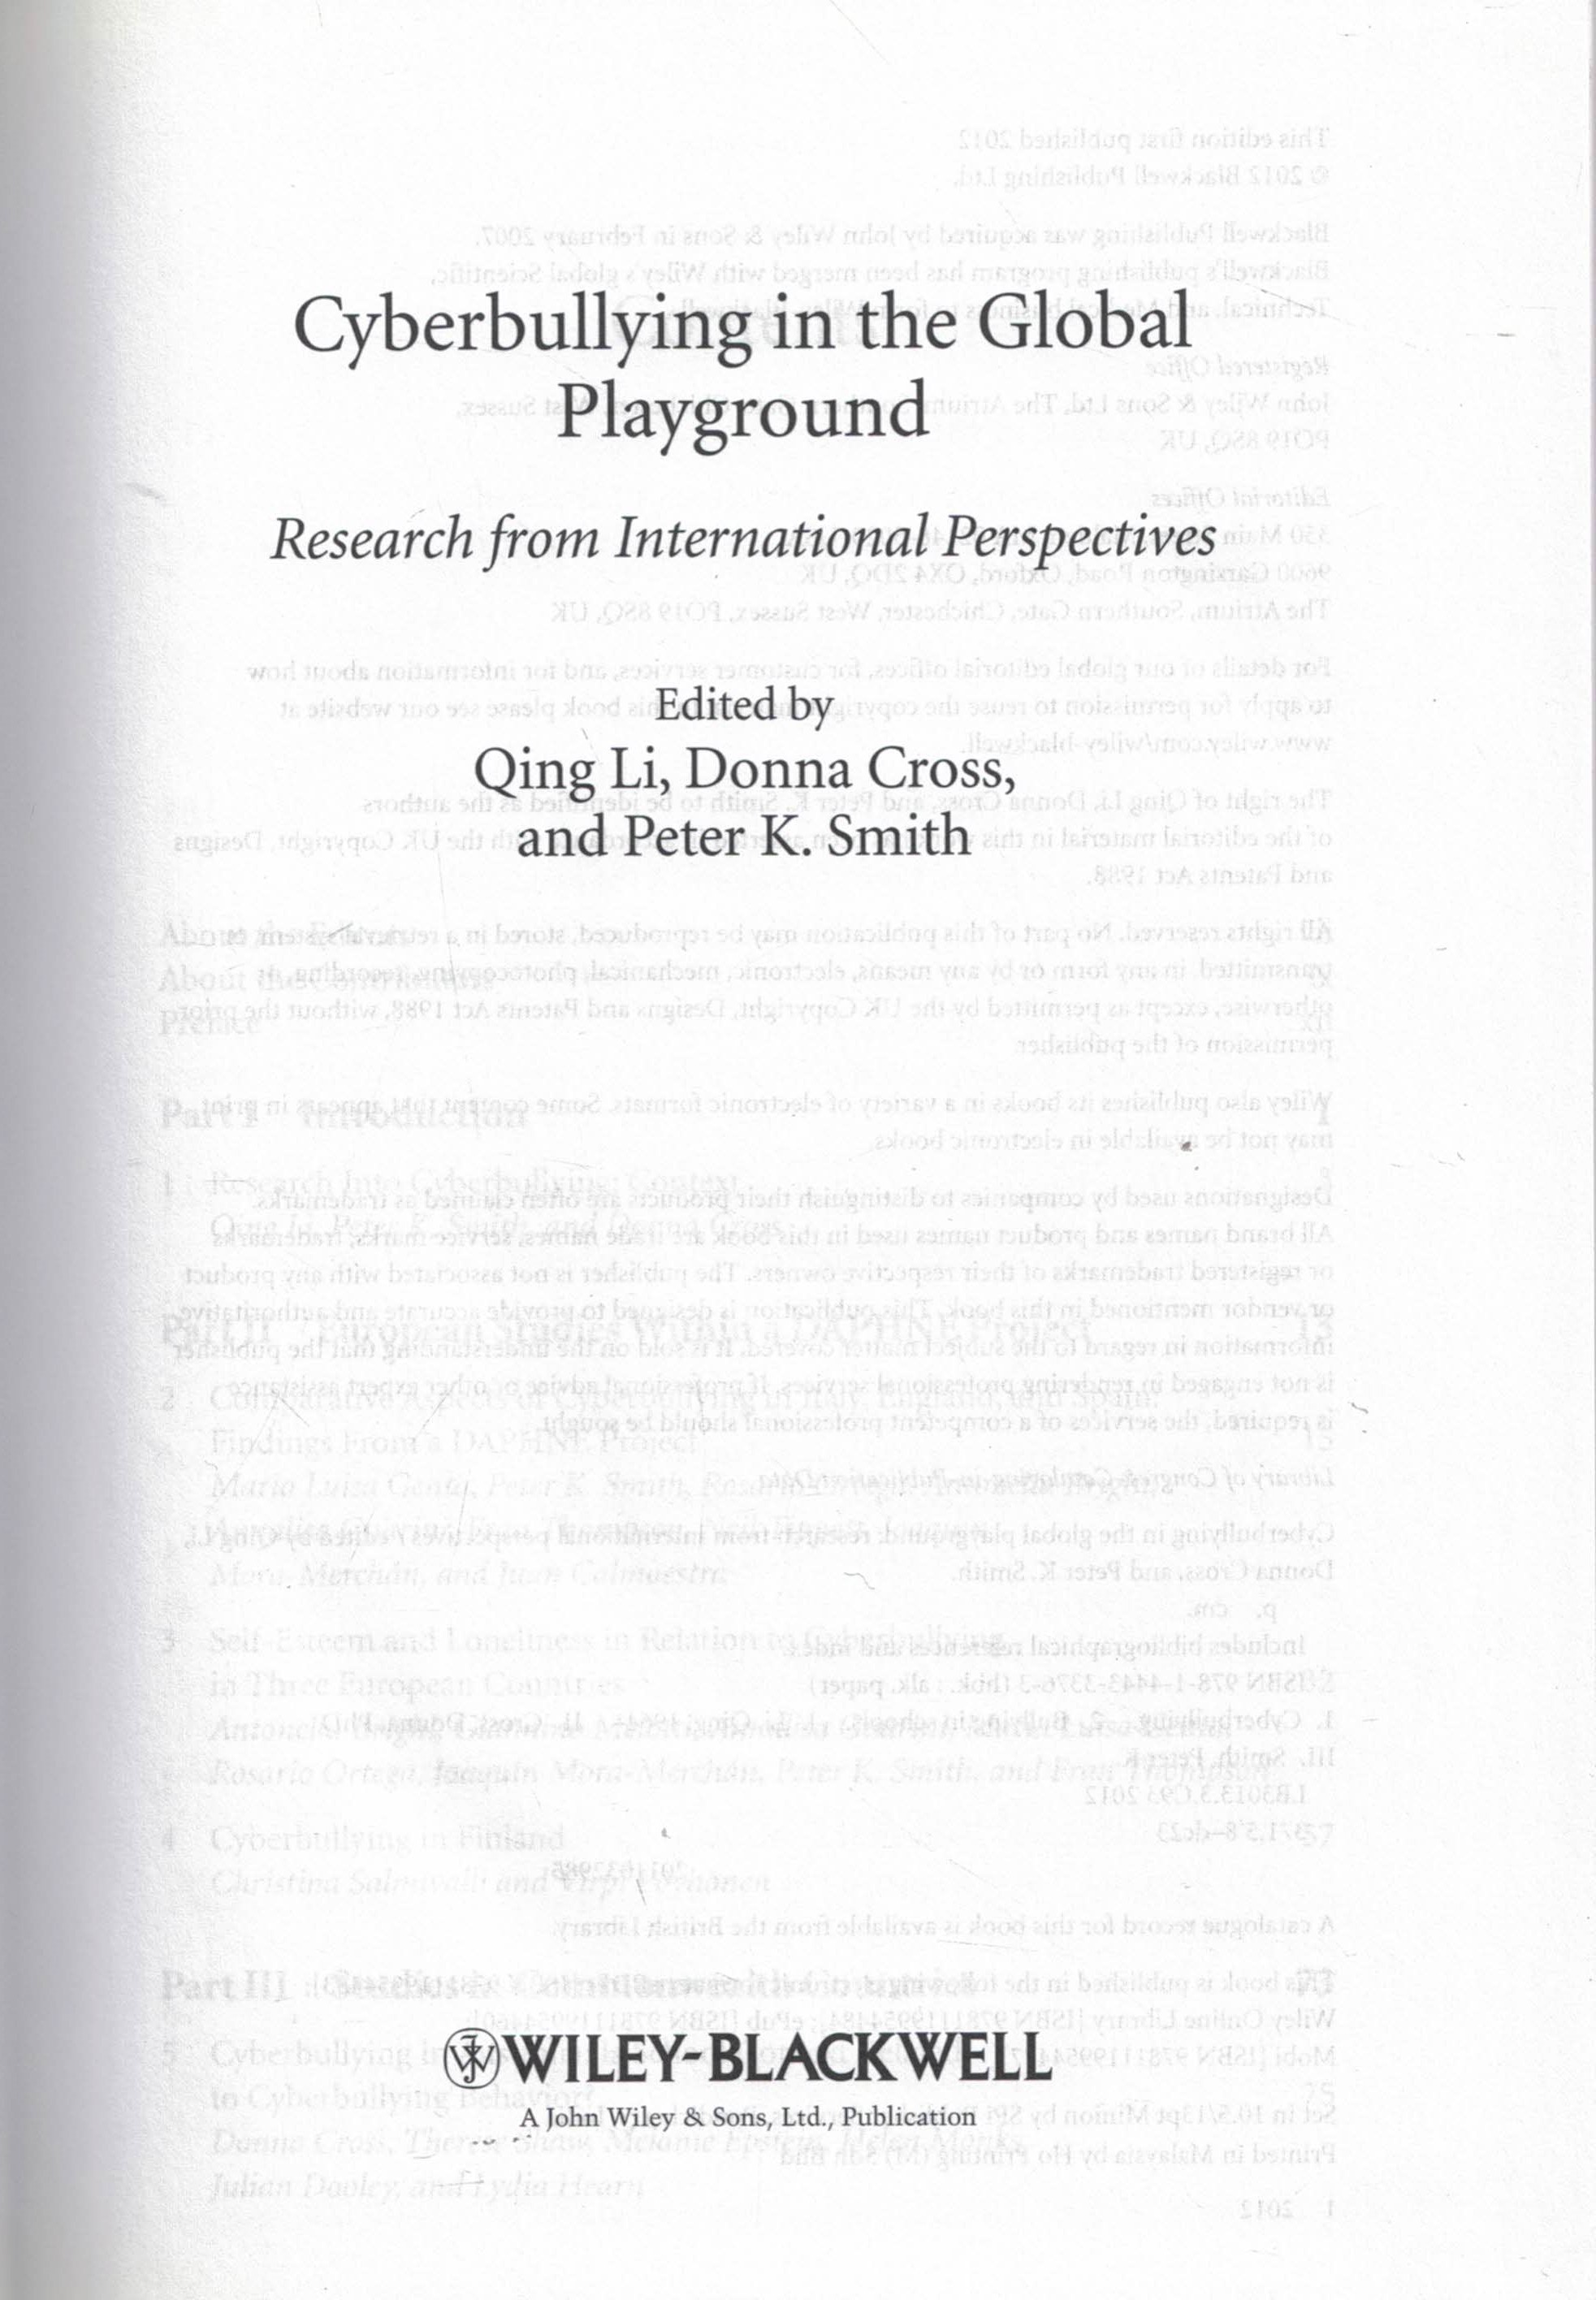 Cyberbullying in the Global Playground. Research from International Perspectives.